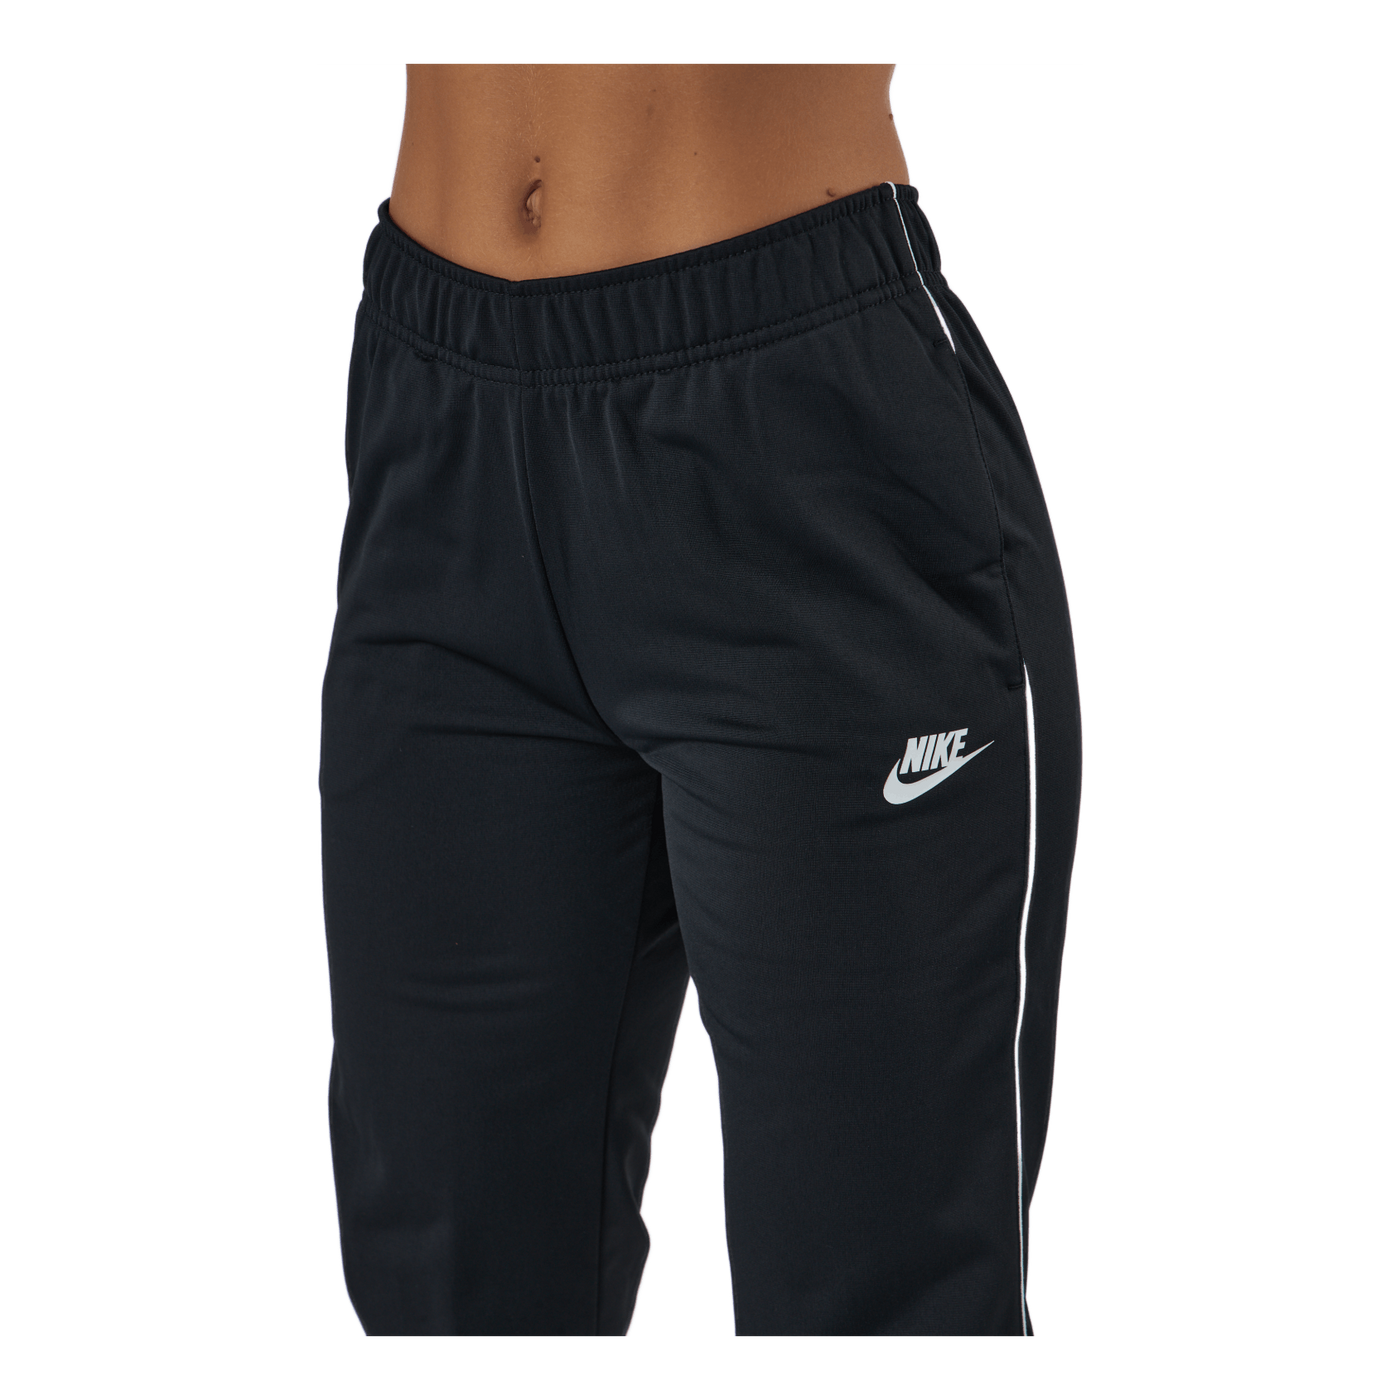 Sportswear Women's Fitted Track Suit BLACK/WHITE/WHITE